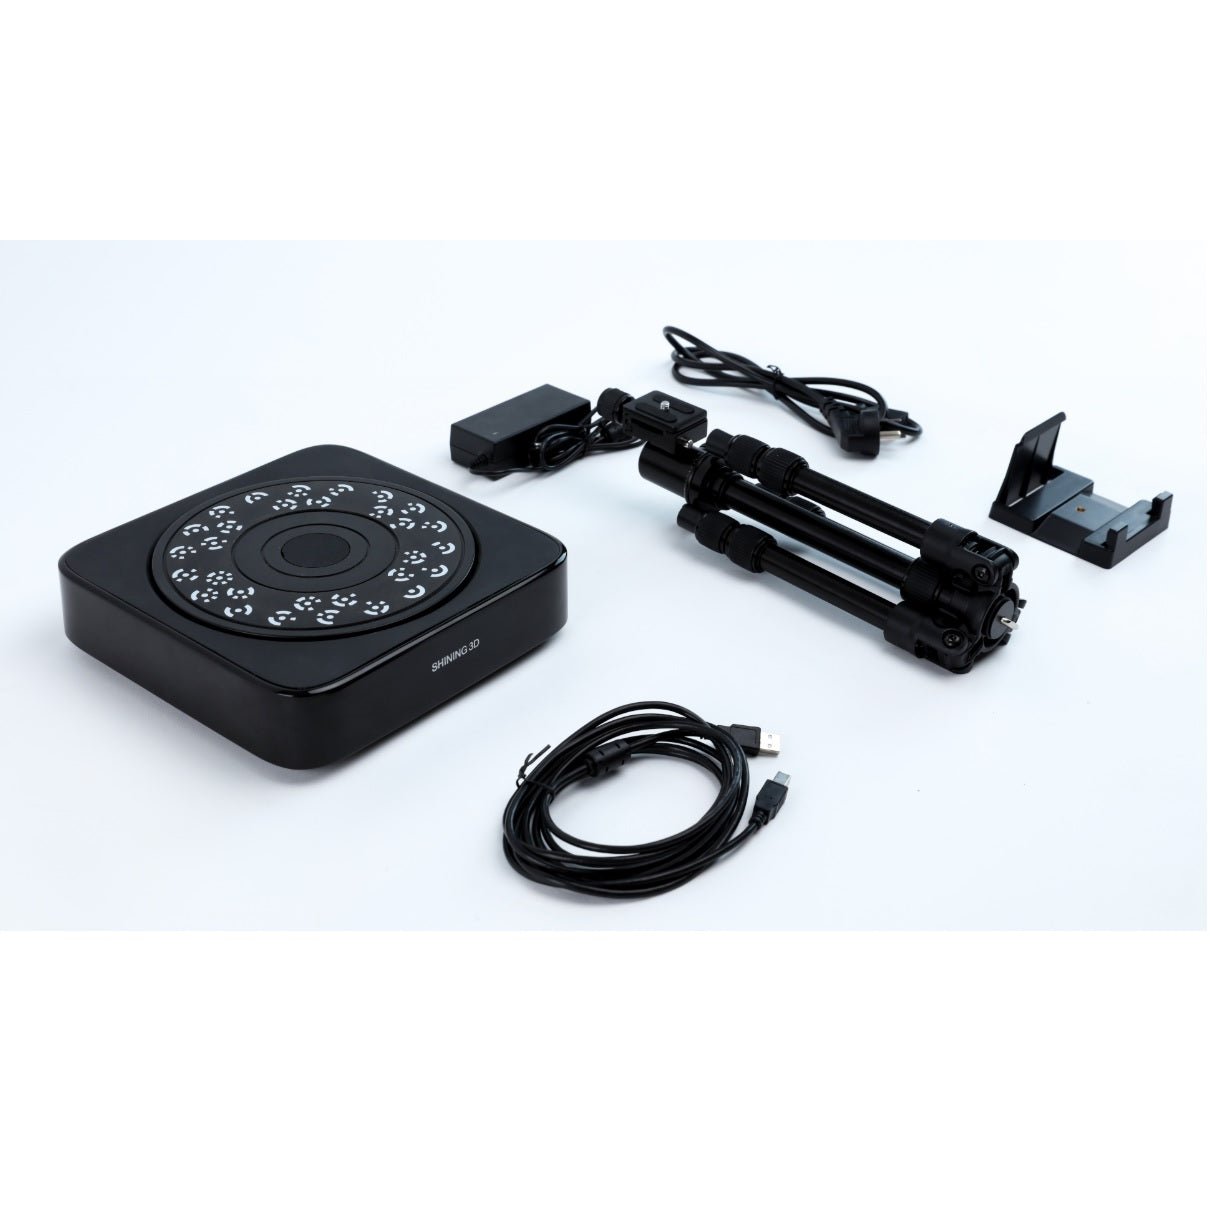 Tripod and Turntable Add - on for EinScan - Pro 2X and EinScan - Pro 2X PLUS